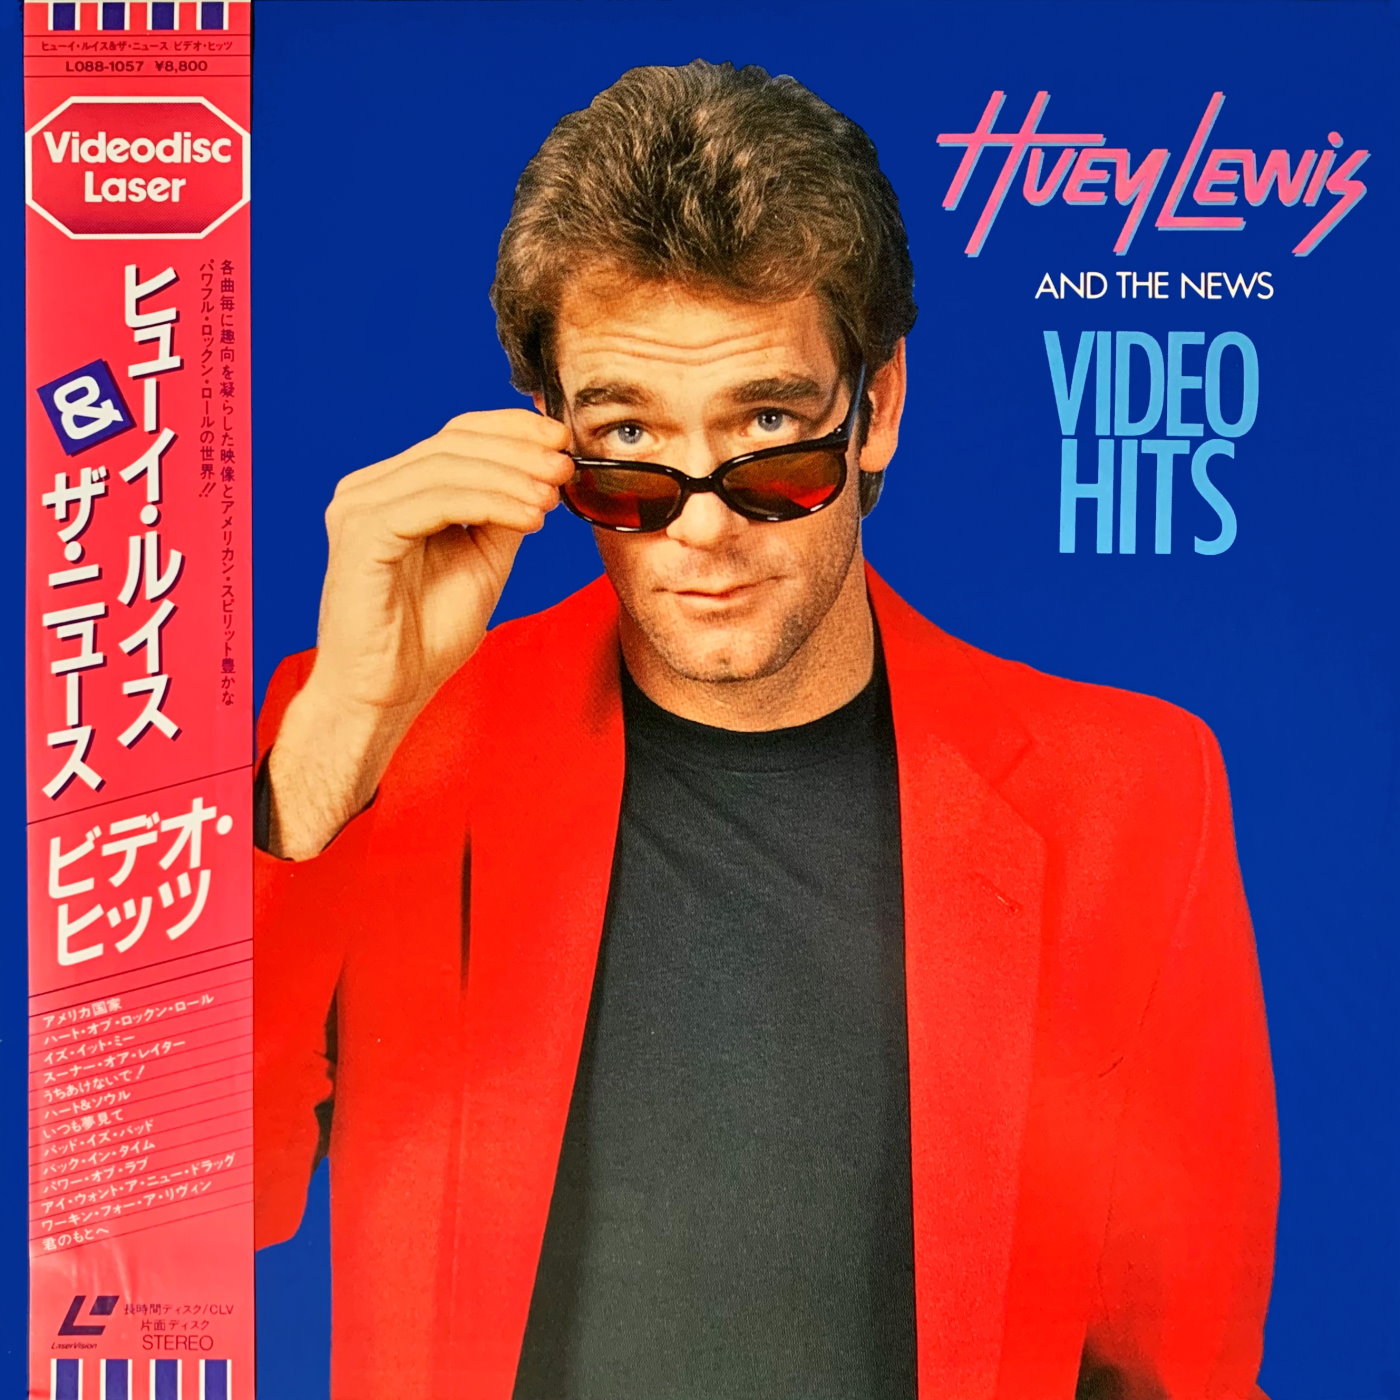 Cover - Huey Lewis And The News - Video Hits.jpg